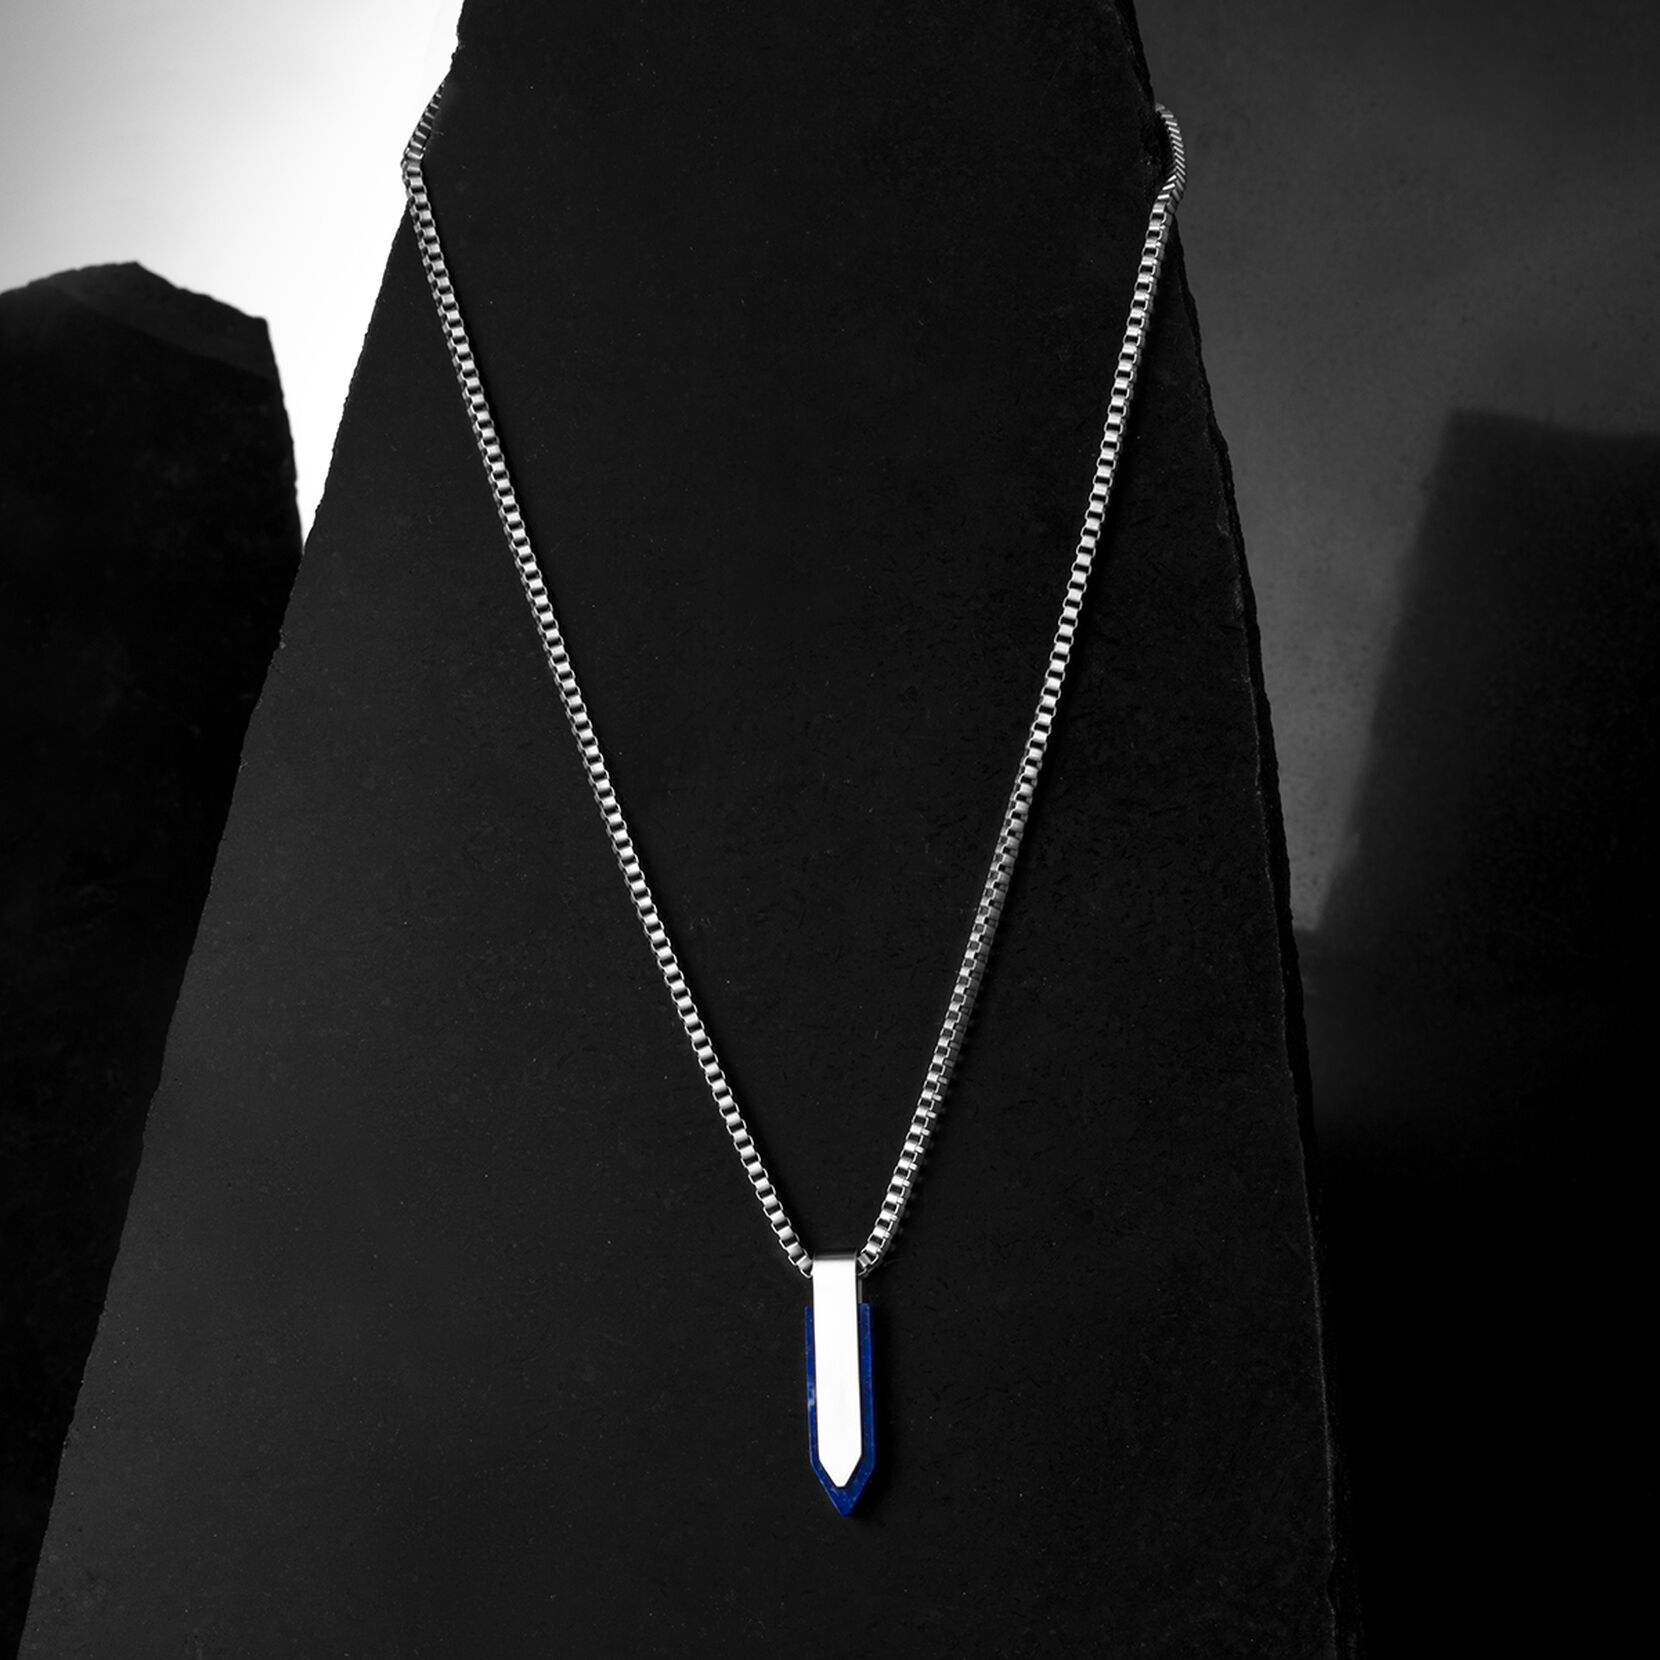 Stone Spearhead Necklace